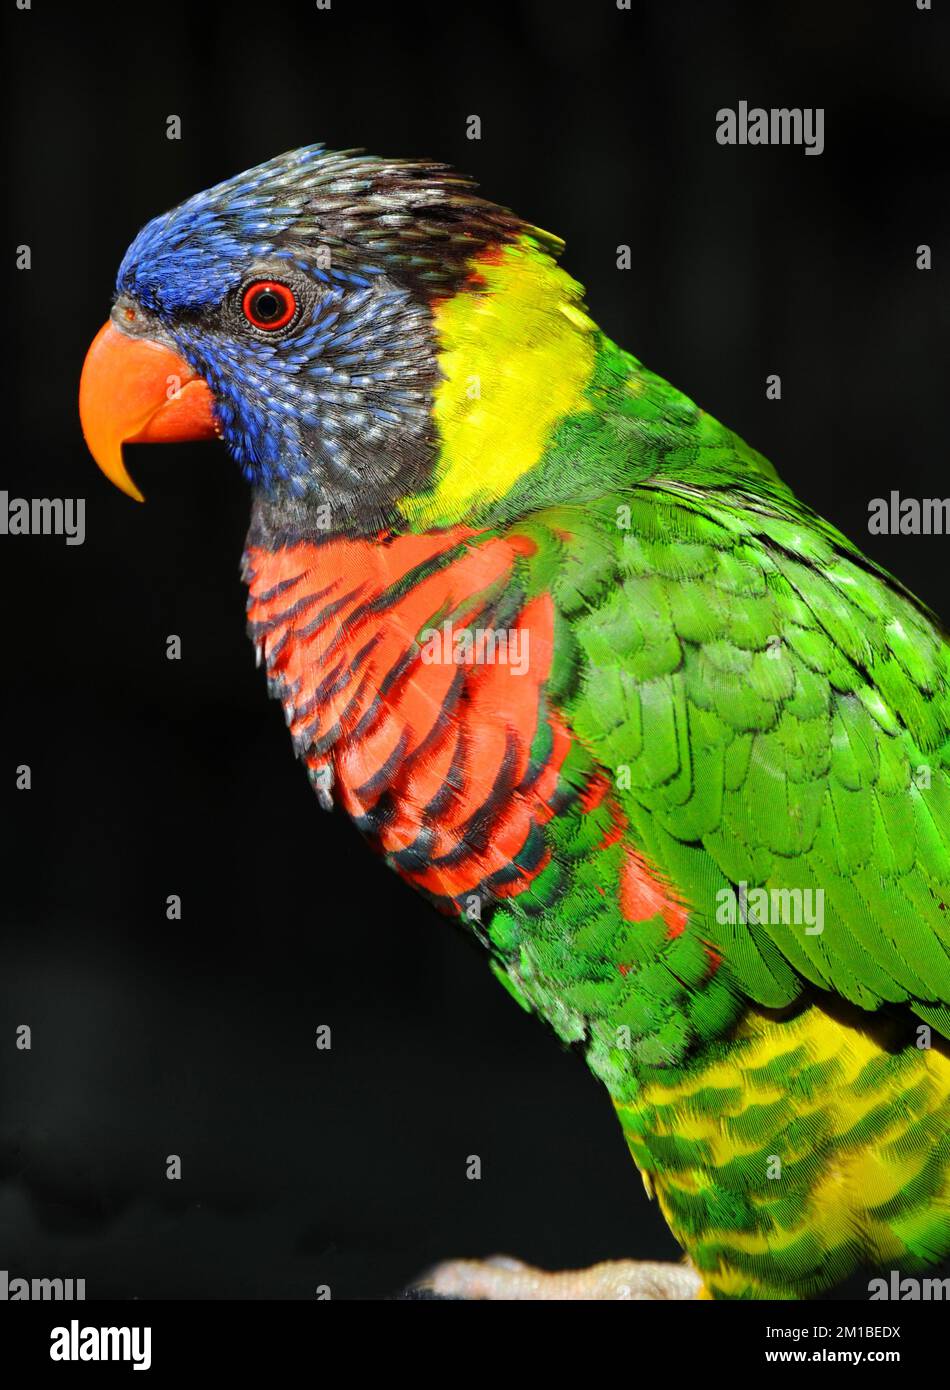 A Rainbow Lorikeet Profile with a dark background shows off all the colorful feathers. Stock Photo